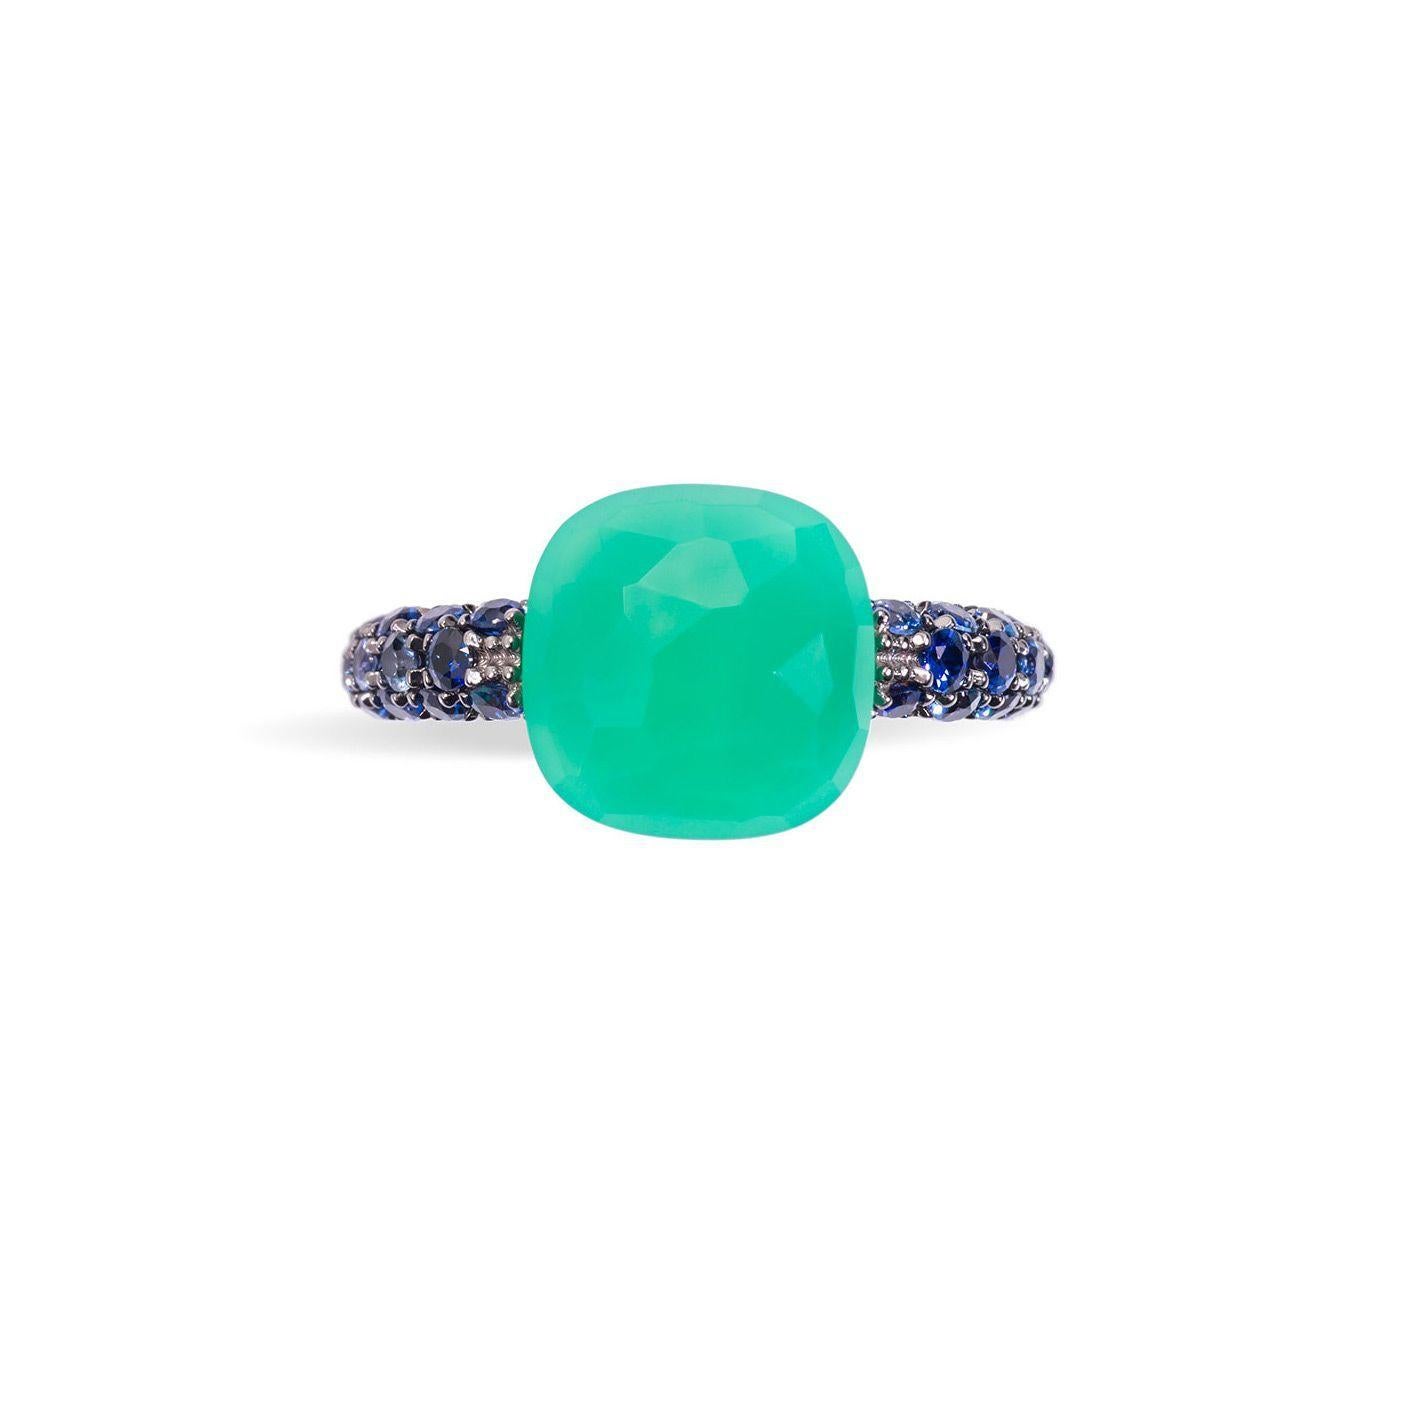 Pomellato Capri ring in pink gold 18k, decorated with chrysoprase and blue sapphires.

The apparent sobriety of this pink gold sapphire and chrysoprase ring from the Capri collection actually hides a very high level of craftsmanship that transforms